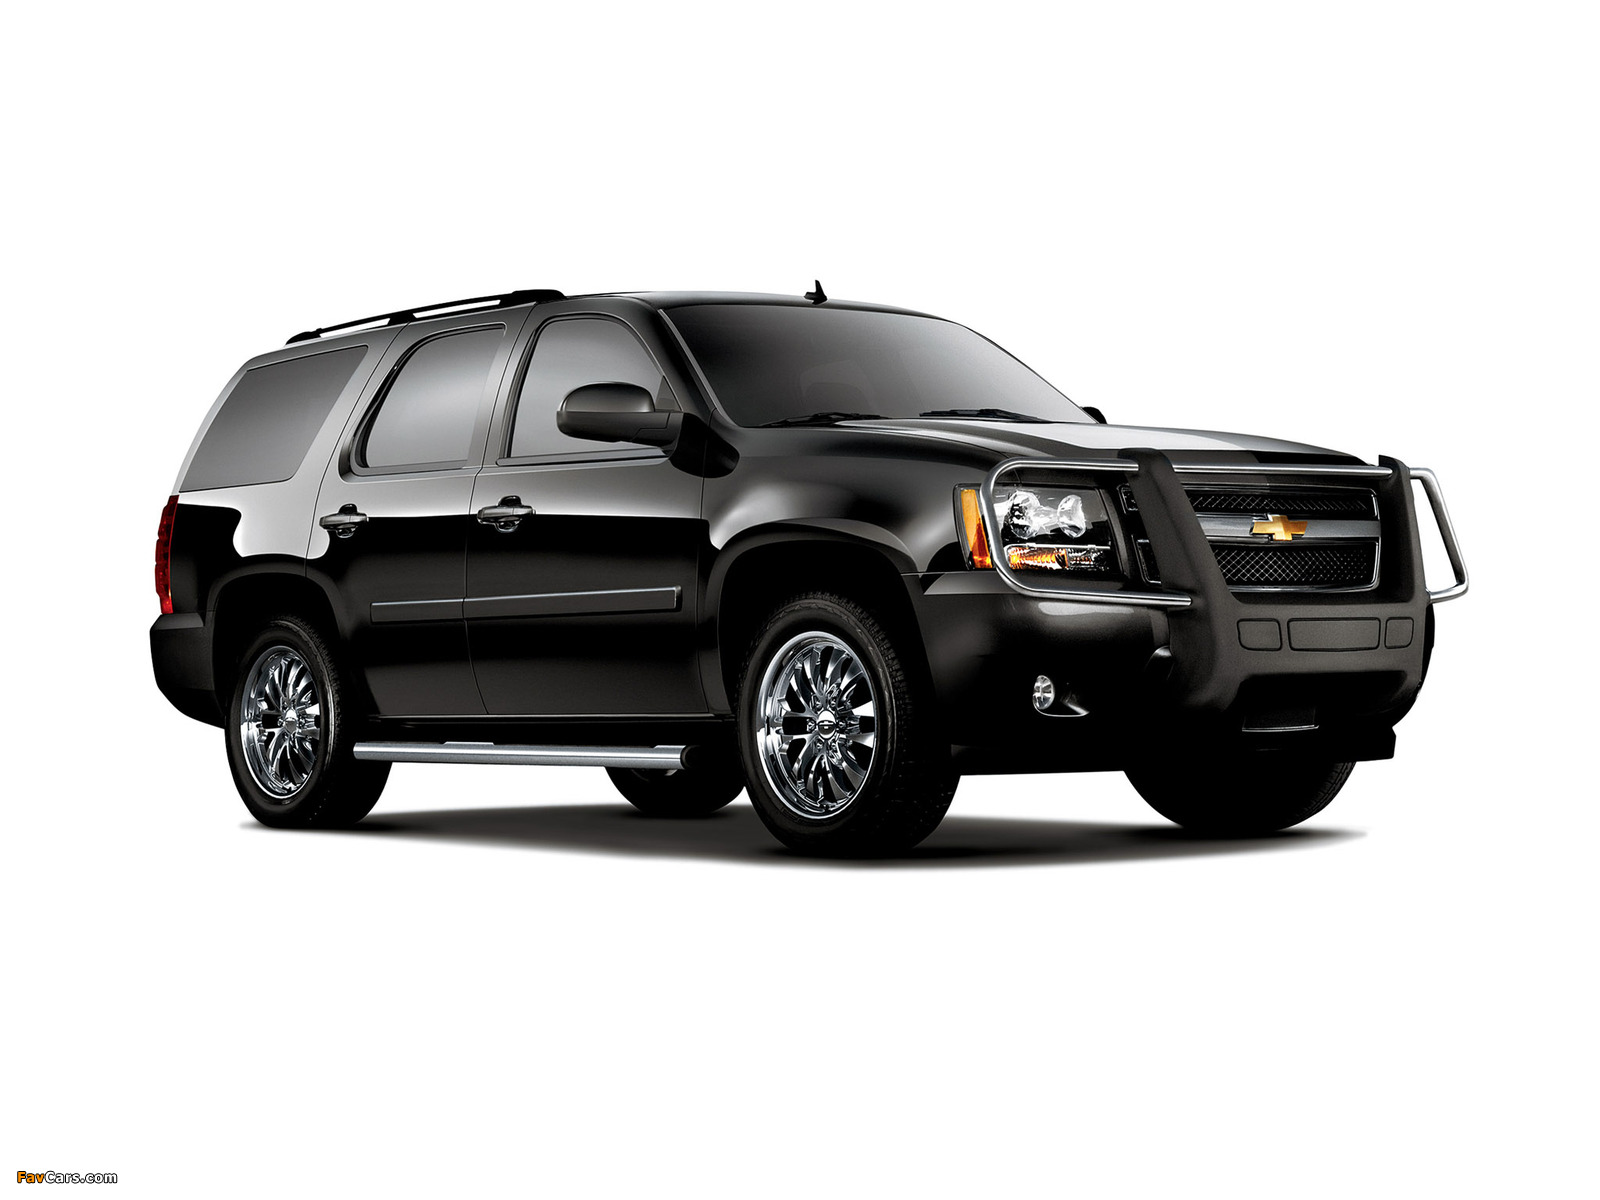 Chevrolet Tahoe (GMT900) 2006 images (1600 x 1200)